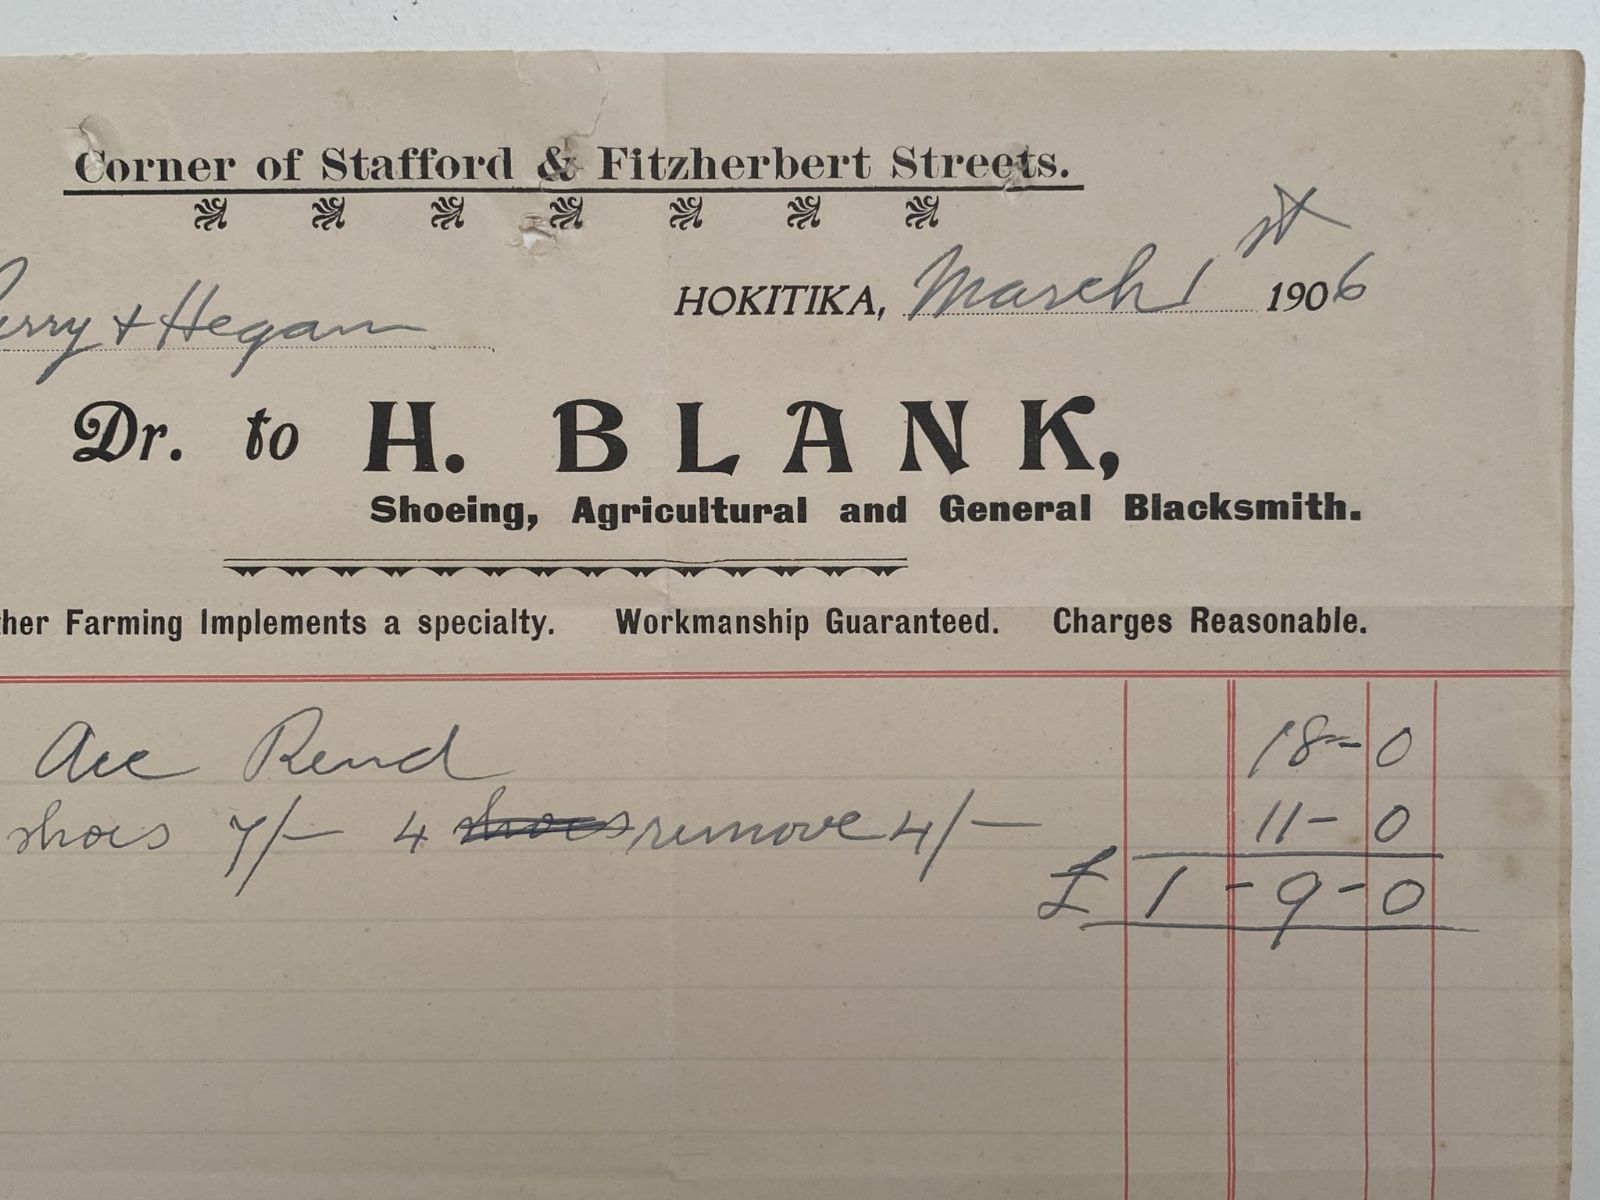 ANTIQUE INVOICE: H. Blank, Hokitika - Shoeing, Agricultural and Blacksmiths 1906